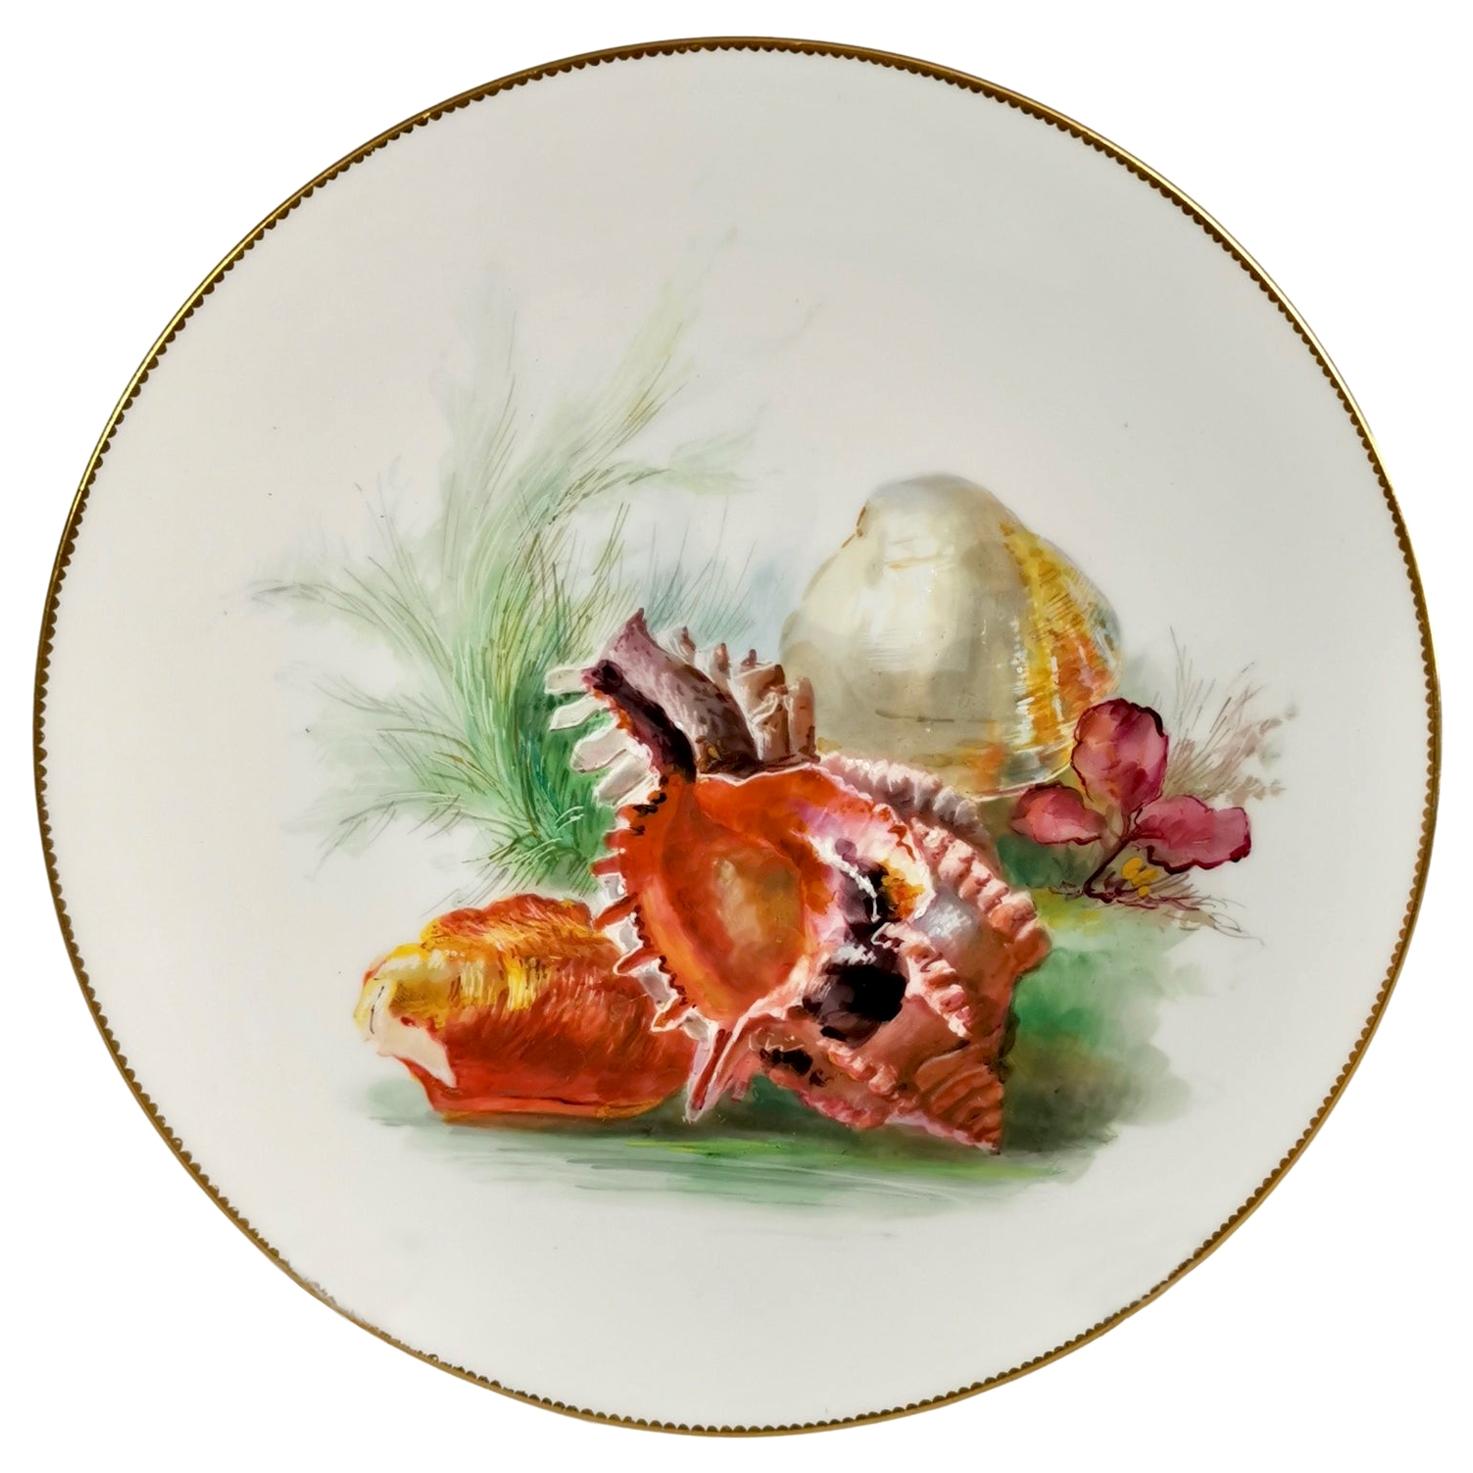 Minton Porcelain Plate, Sea Shells by W. Mussill, Victorian, 1891